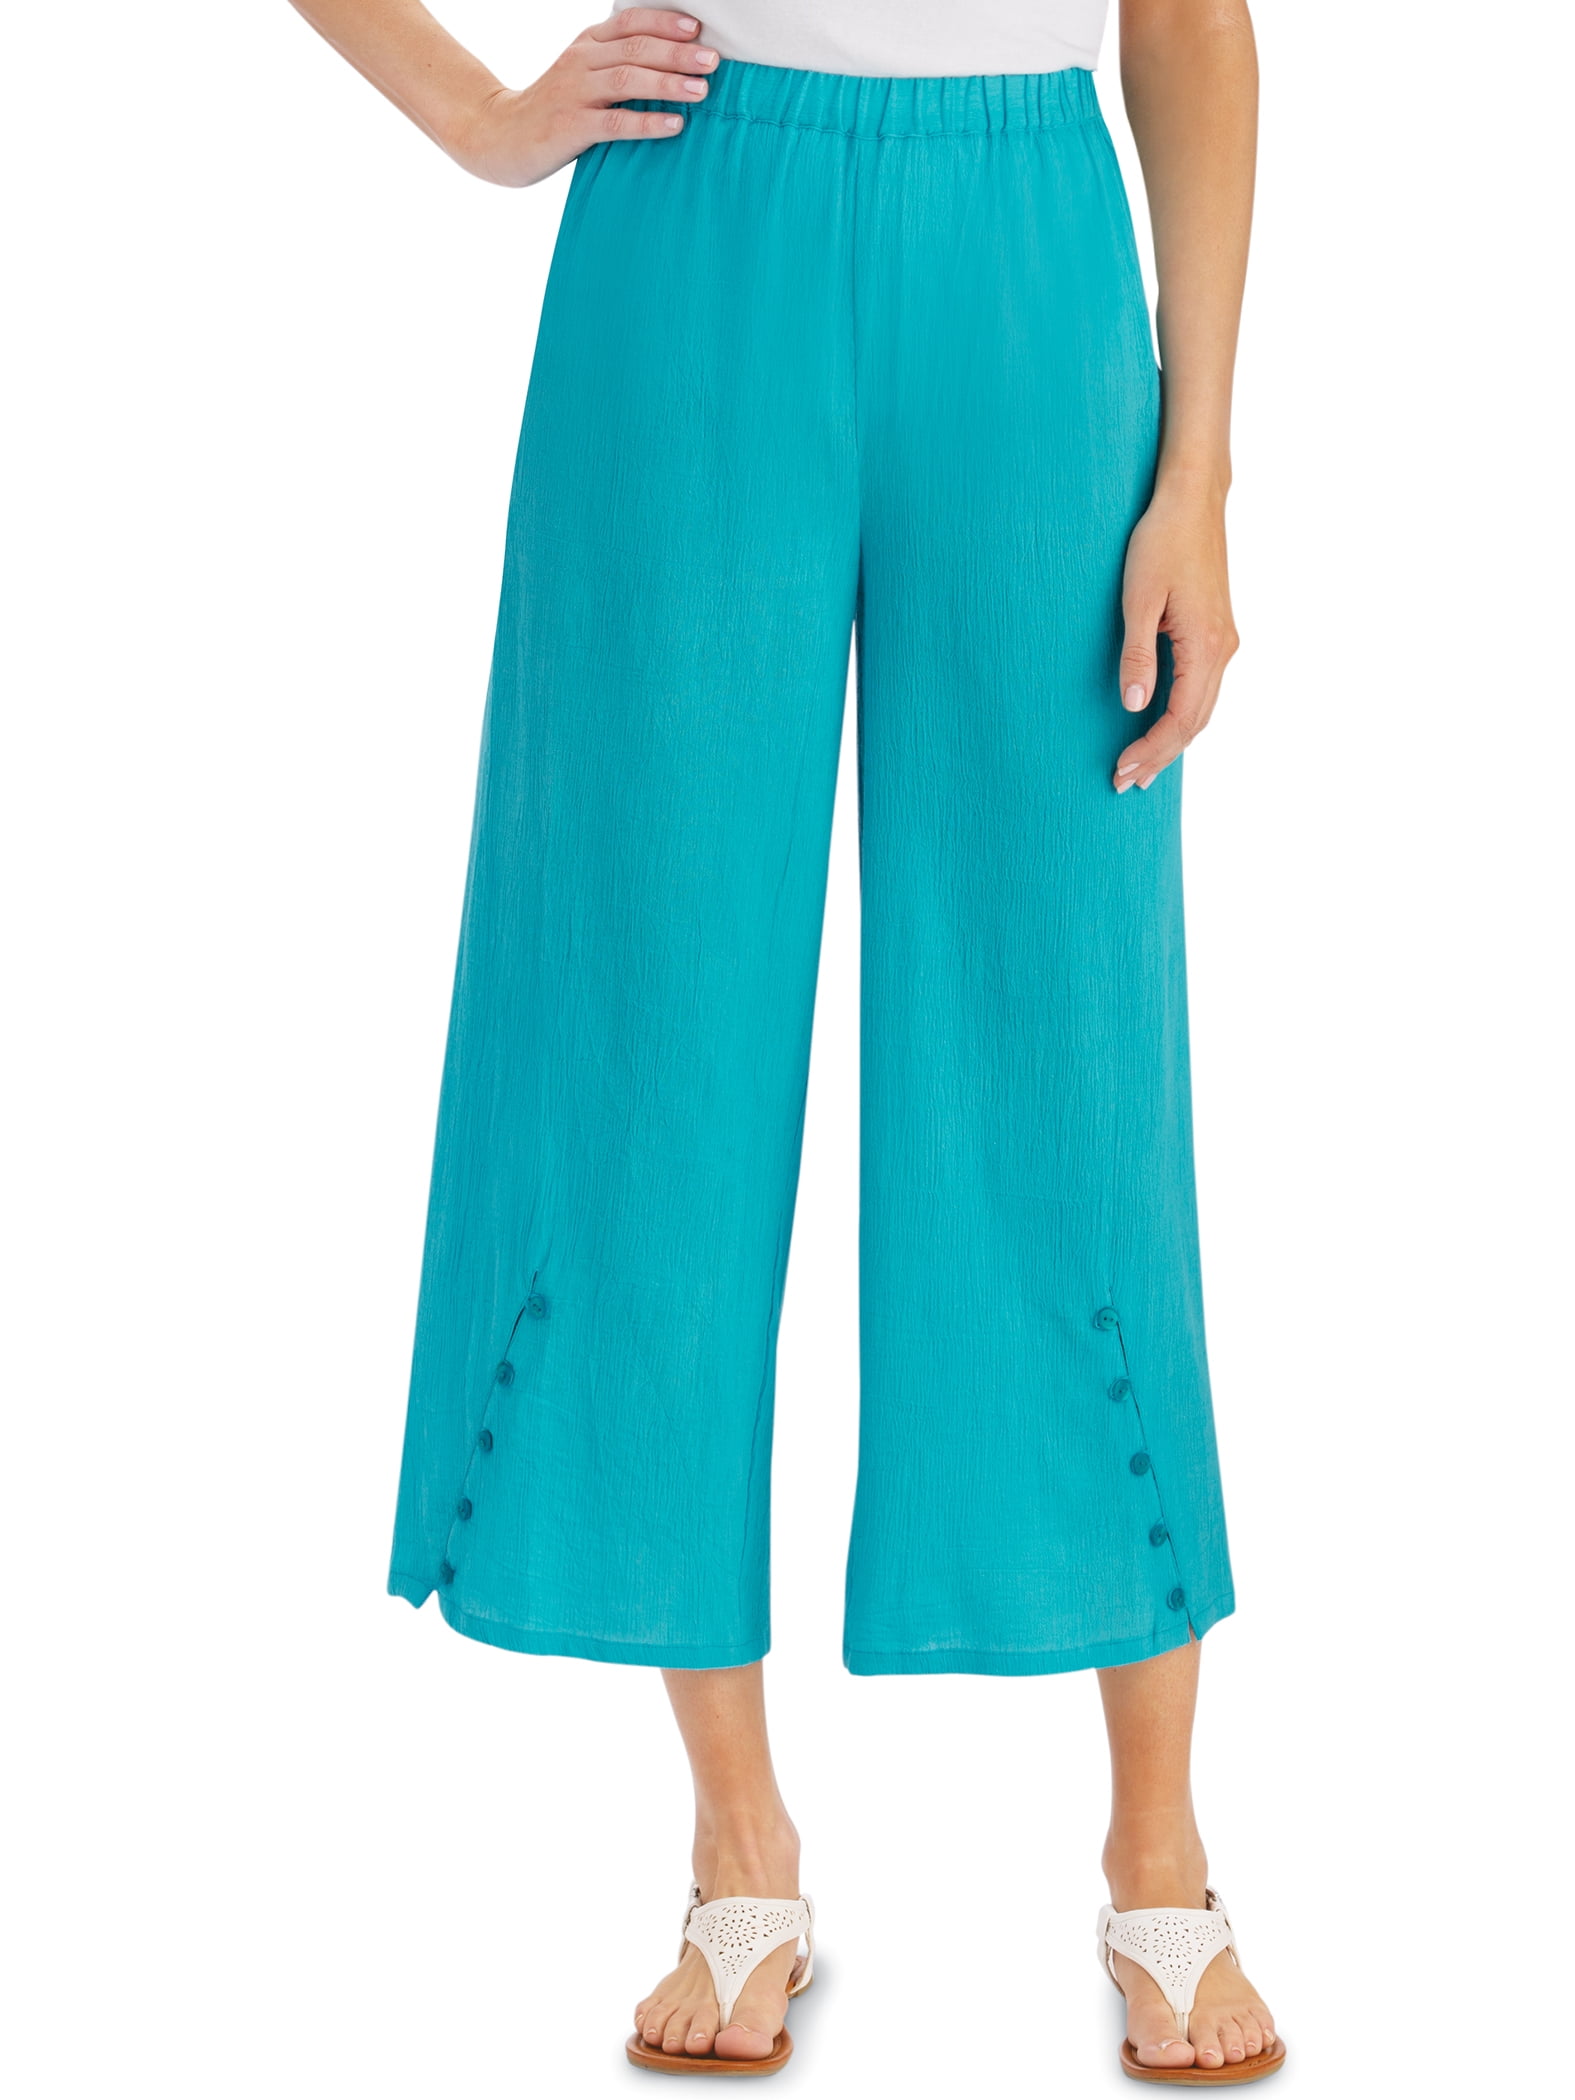 Collections Etc. - Button Trimmed Crinkle Woven Crepe Pants - Crinkle ...